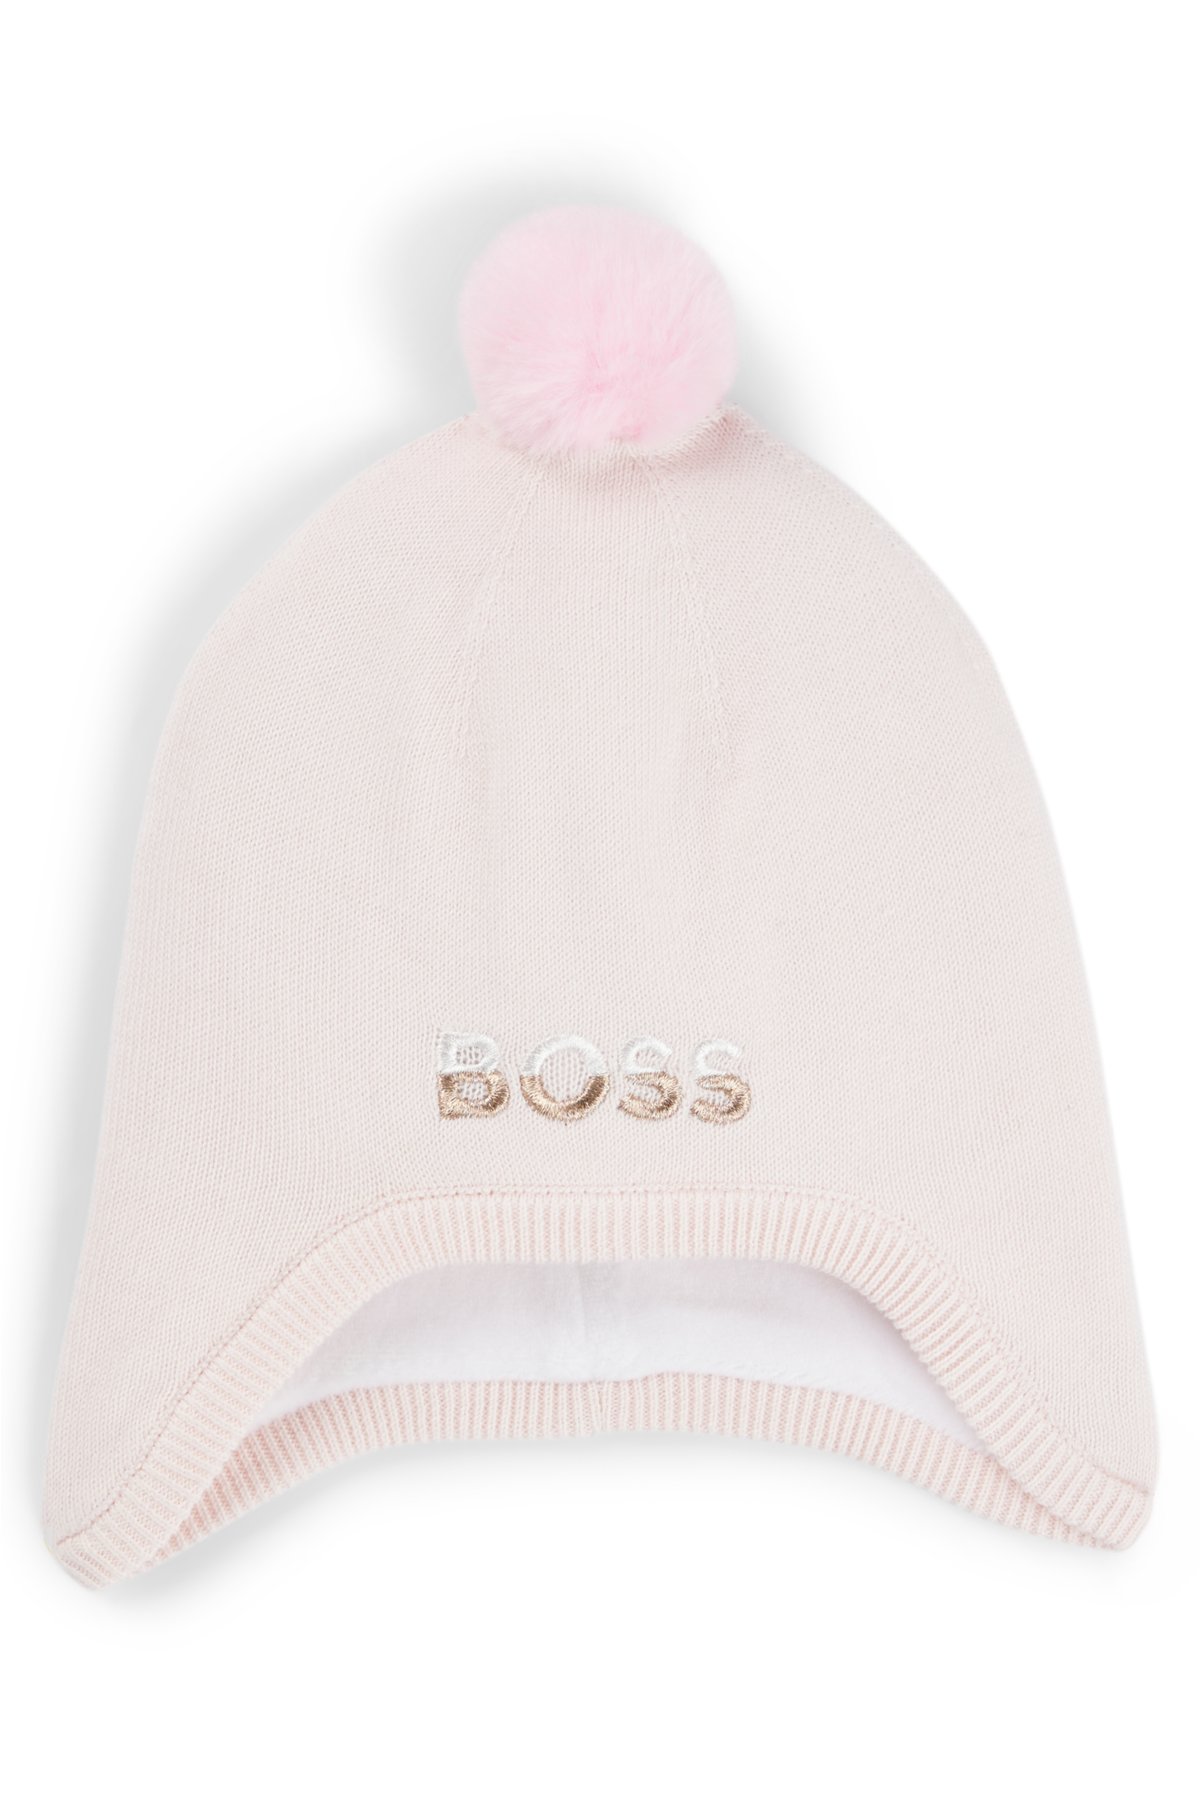 Baby hat in cotton with pompom and embroidered logo, light pink